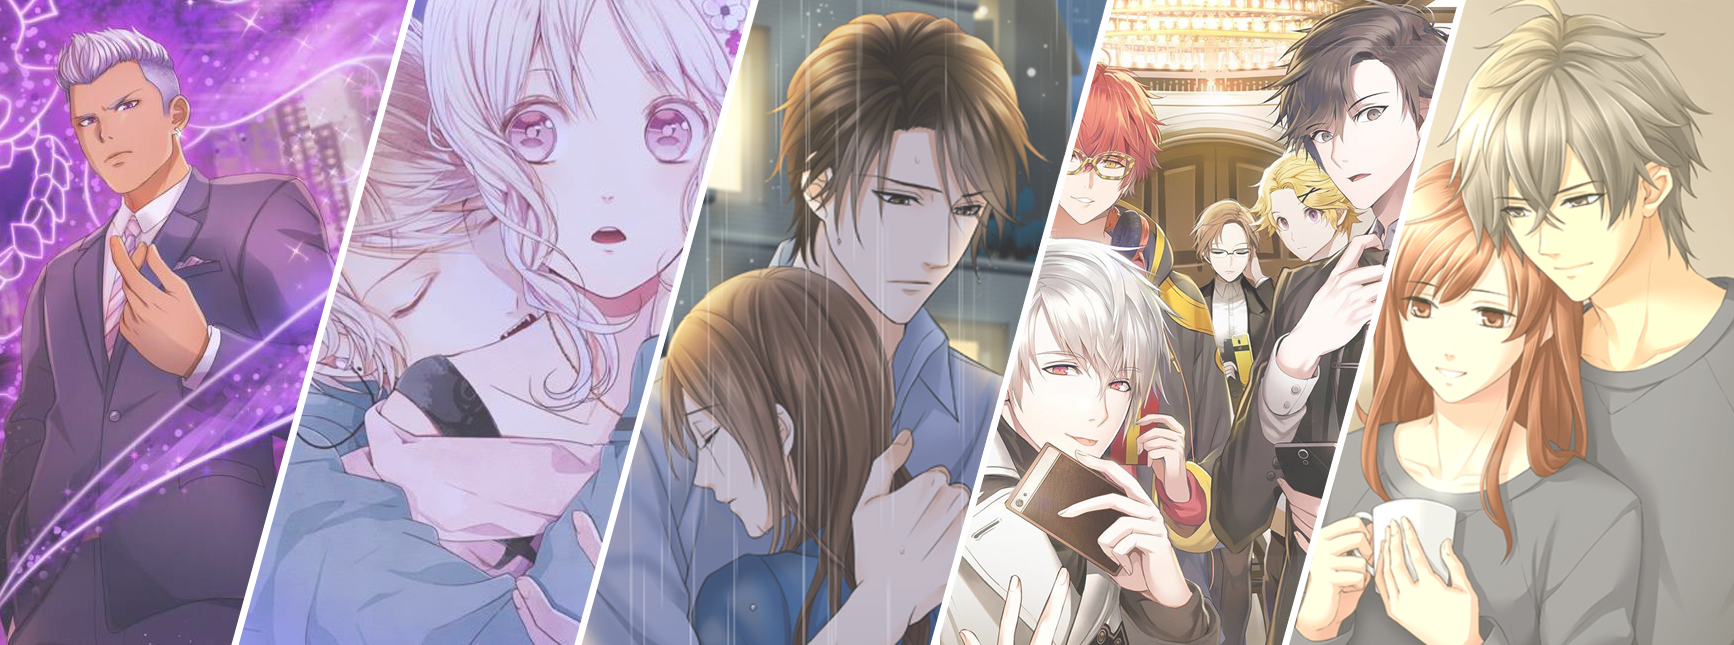 r18 otome games in english